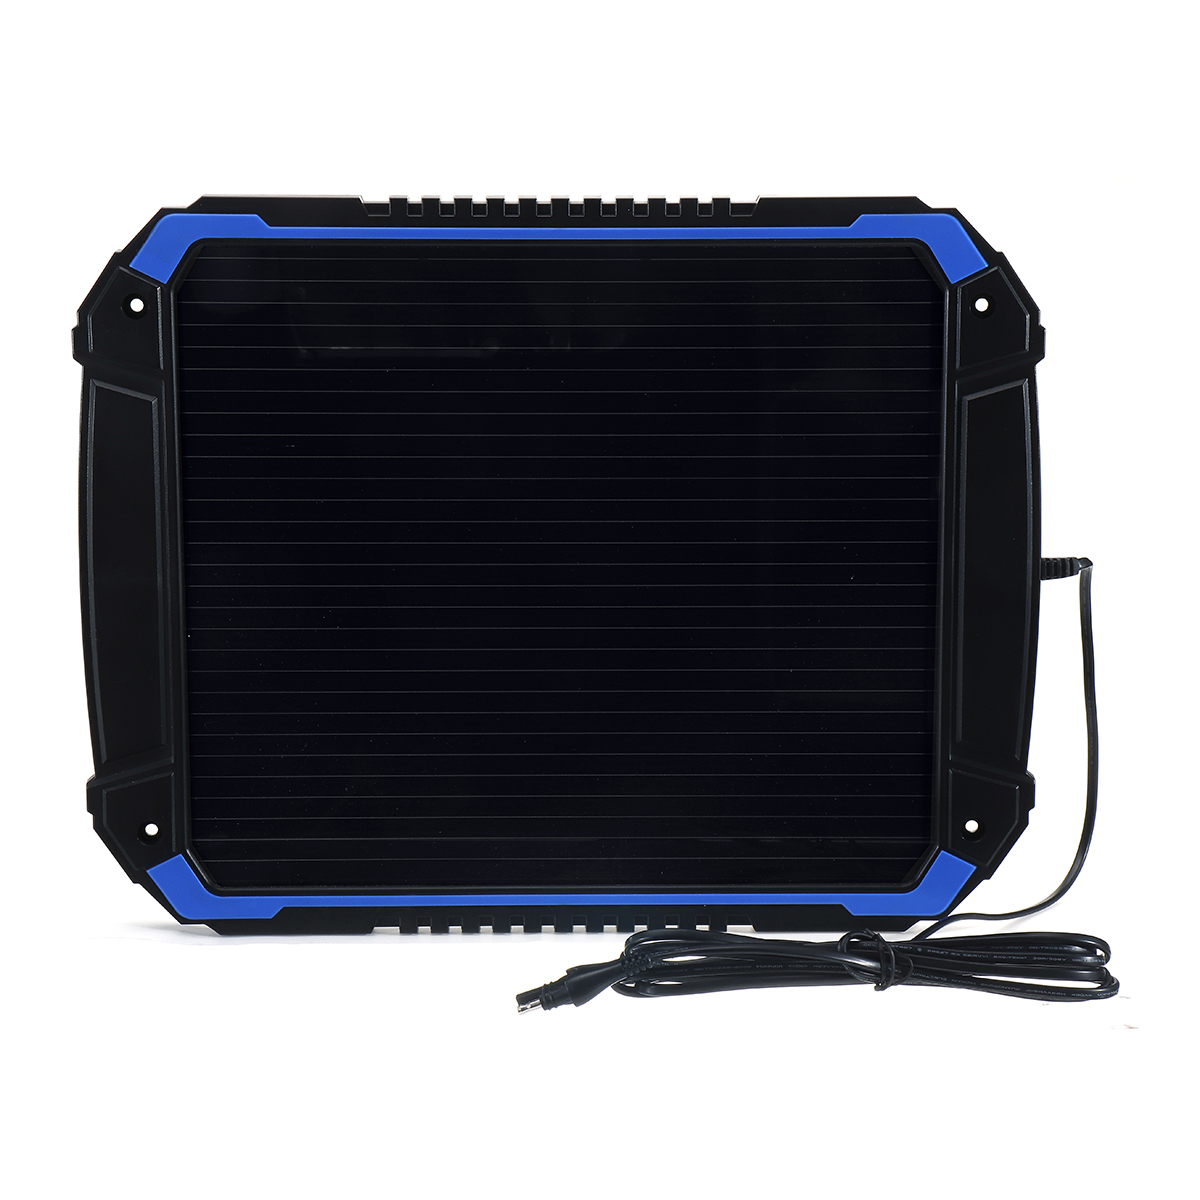 

4.8W 18V Portable Solar Panel Power Battery Charger Backup for Automotive Motorcycle Boat Marine RV etc